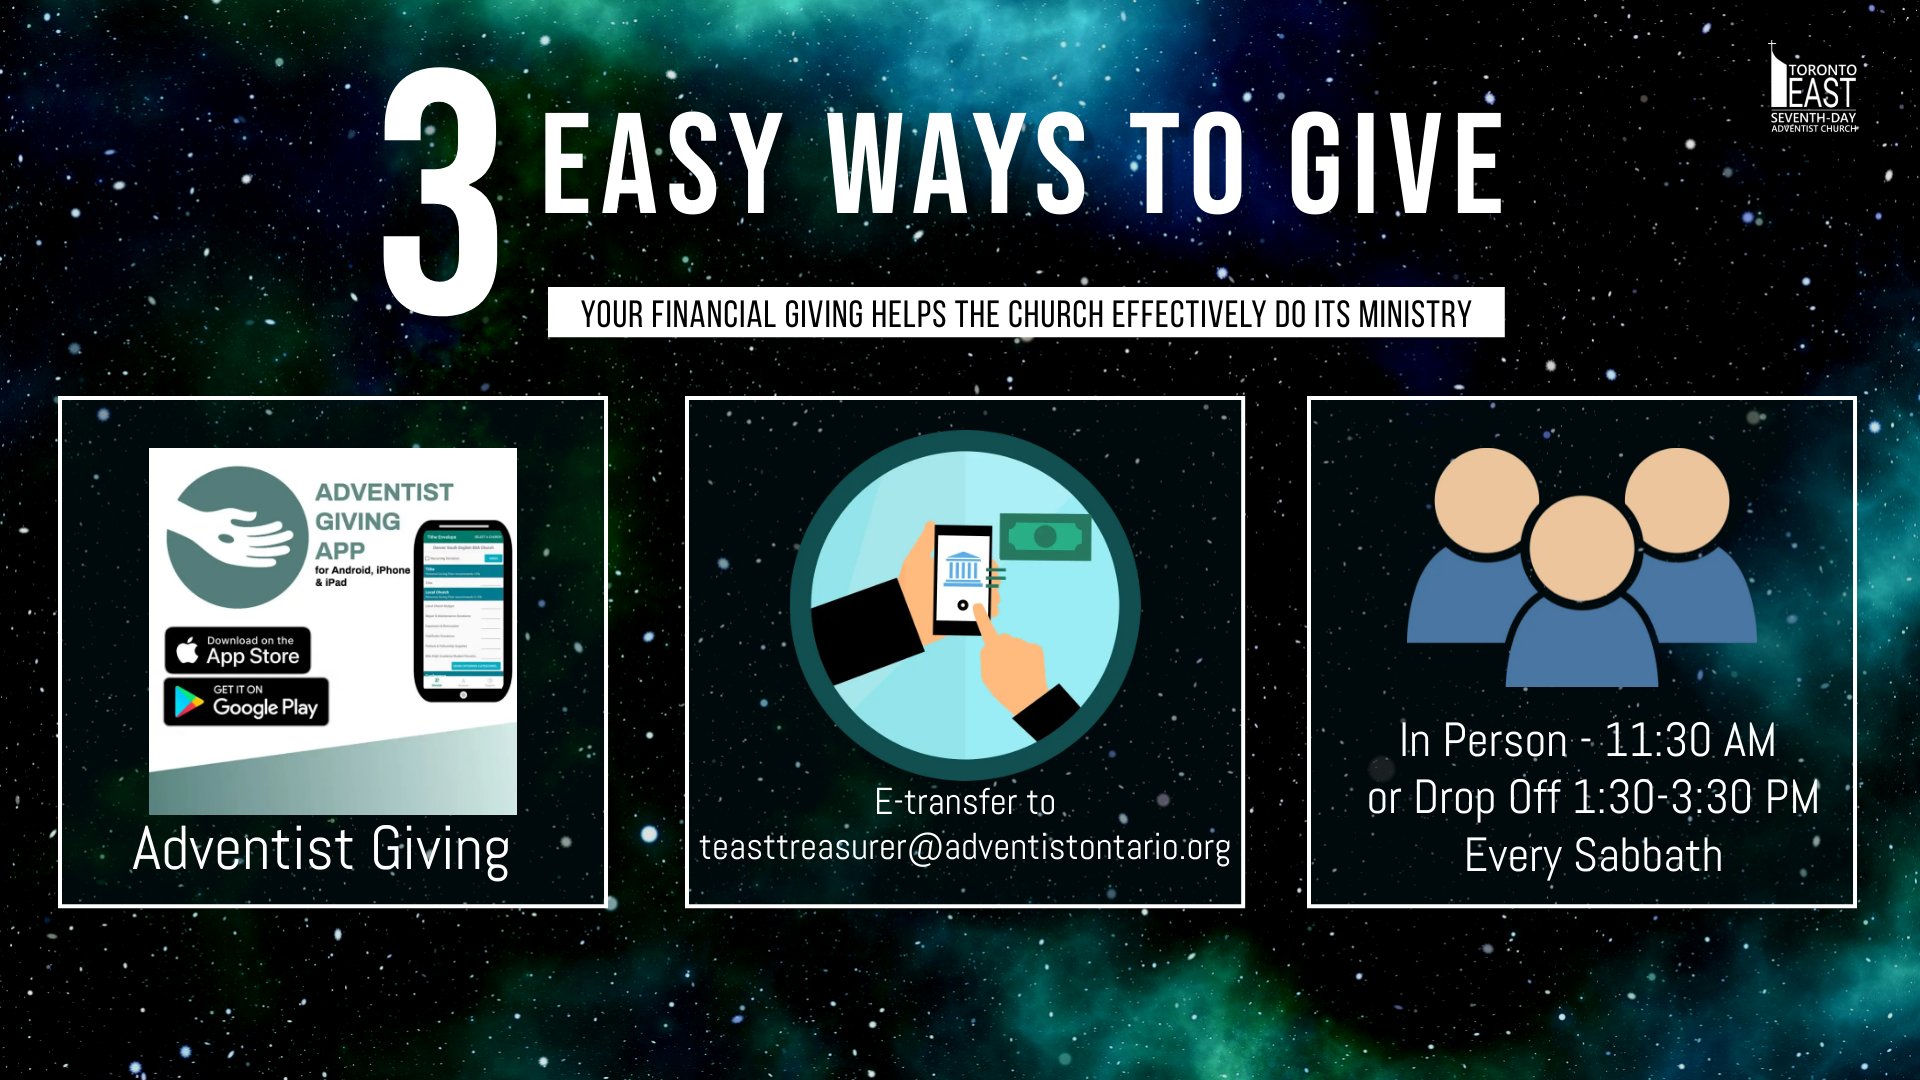 Copy of three ways to give - Made with PosterMyWall (1).jpg